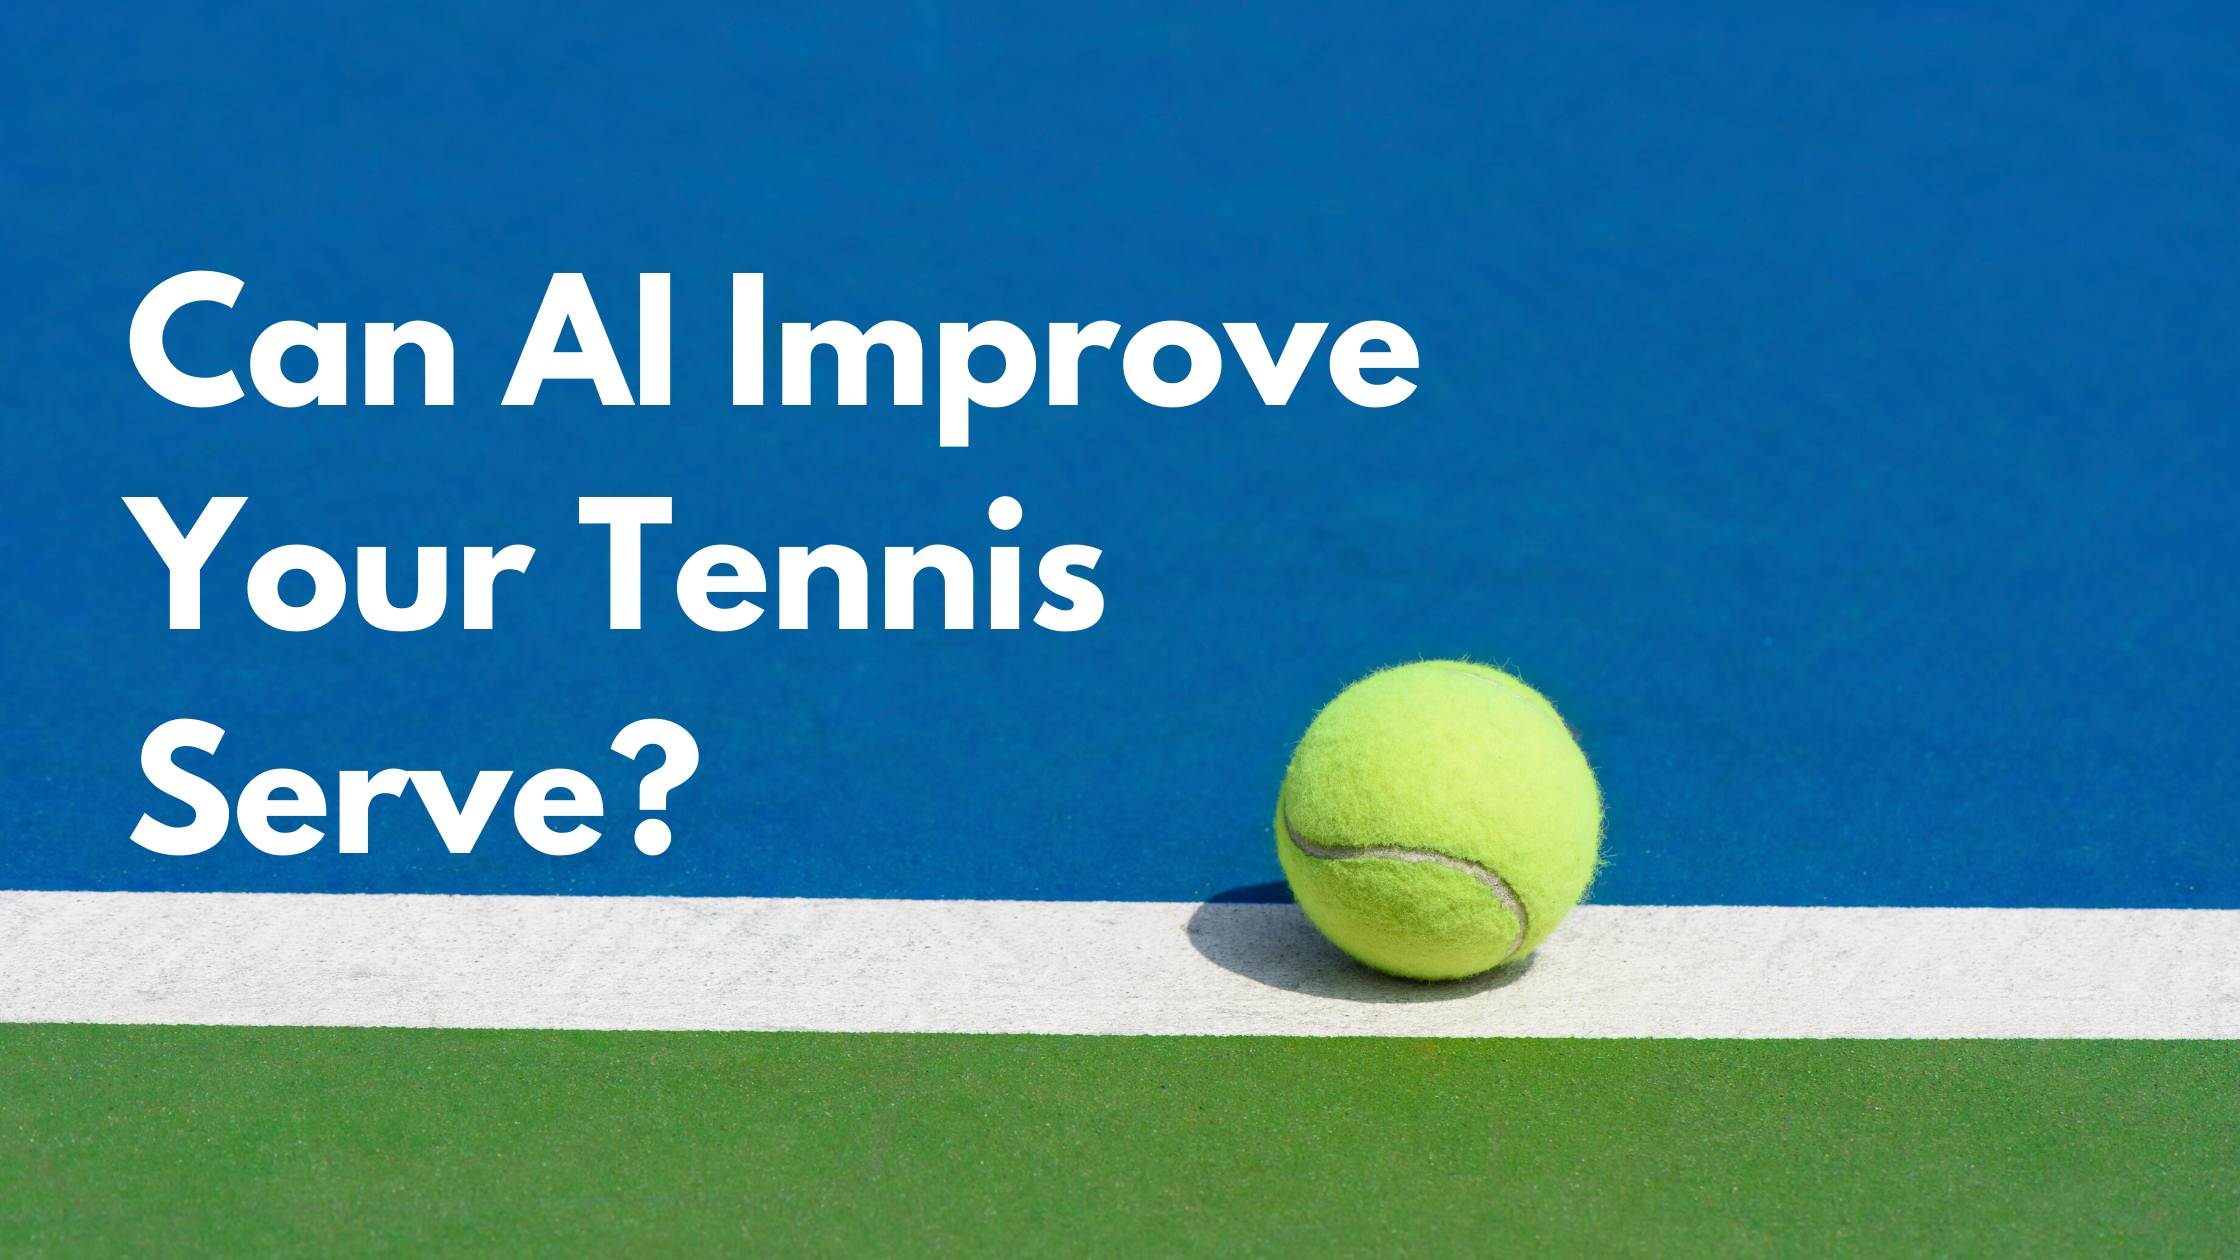 Can AI Make You a Better Athlete? Using Machine Learning to Analyze Tennis Serves and Penalty Kicks